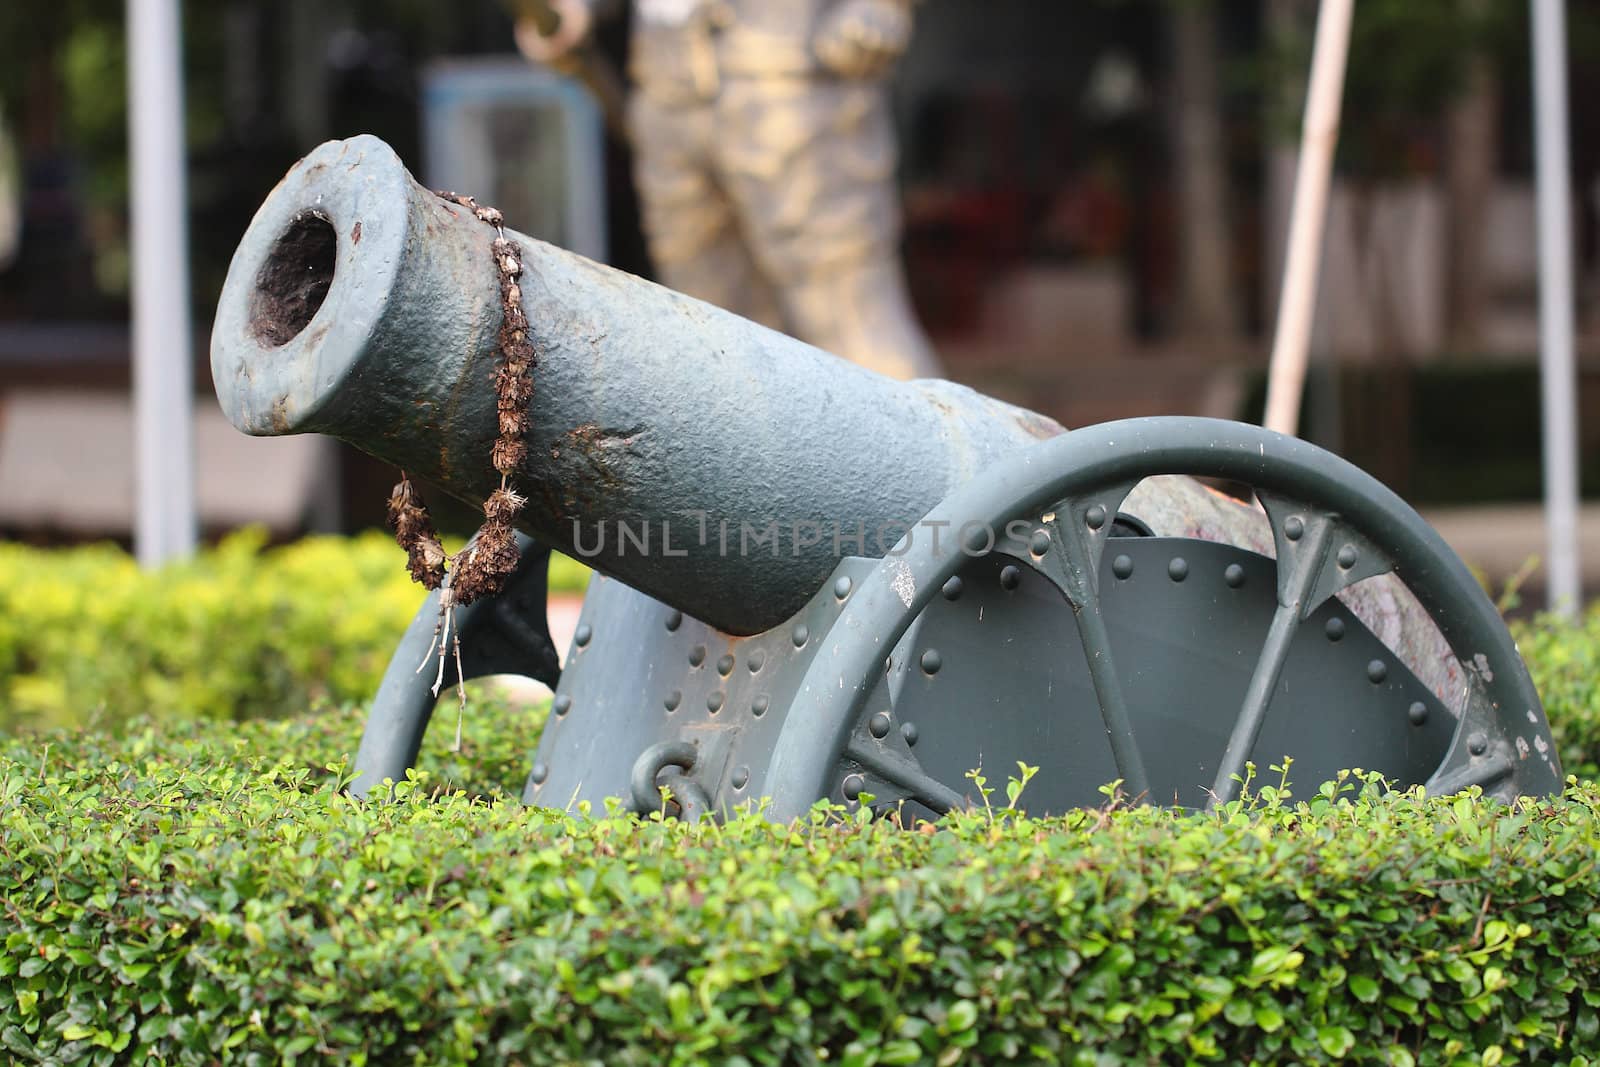 Historic cannon on display